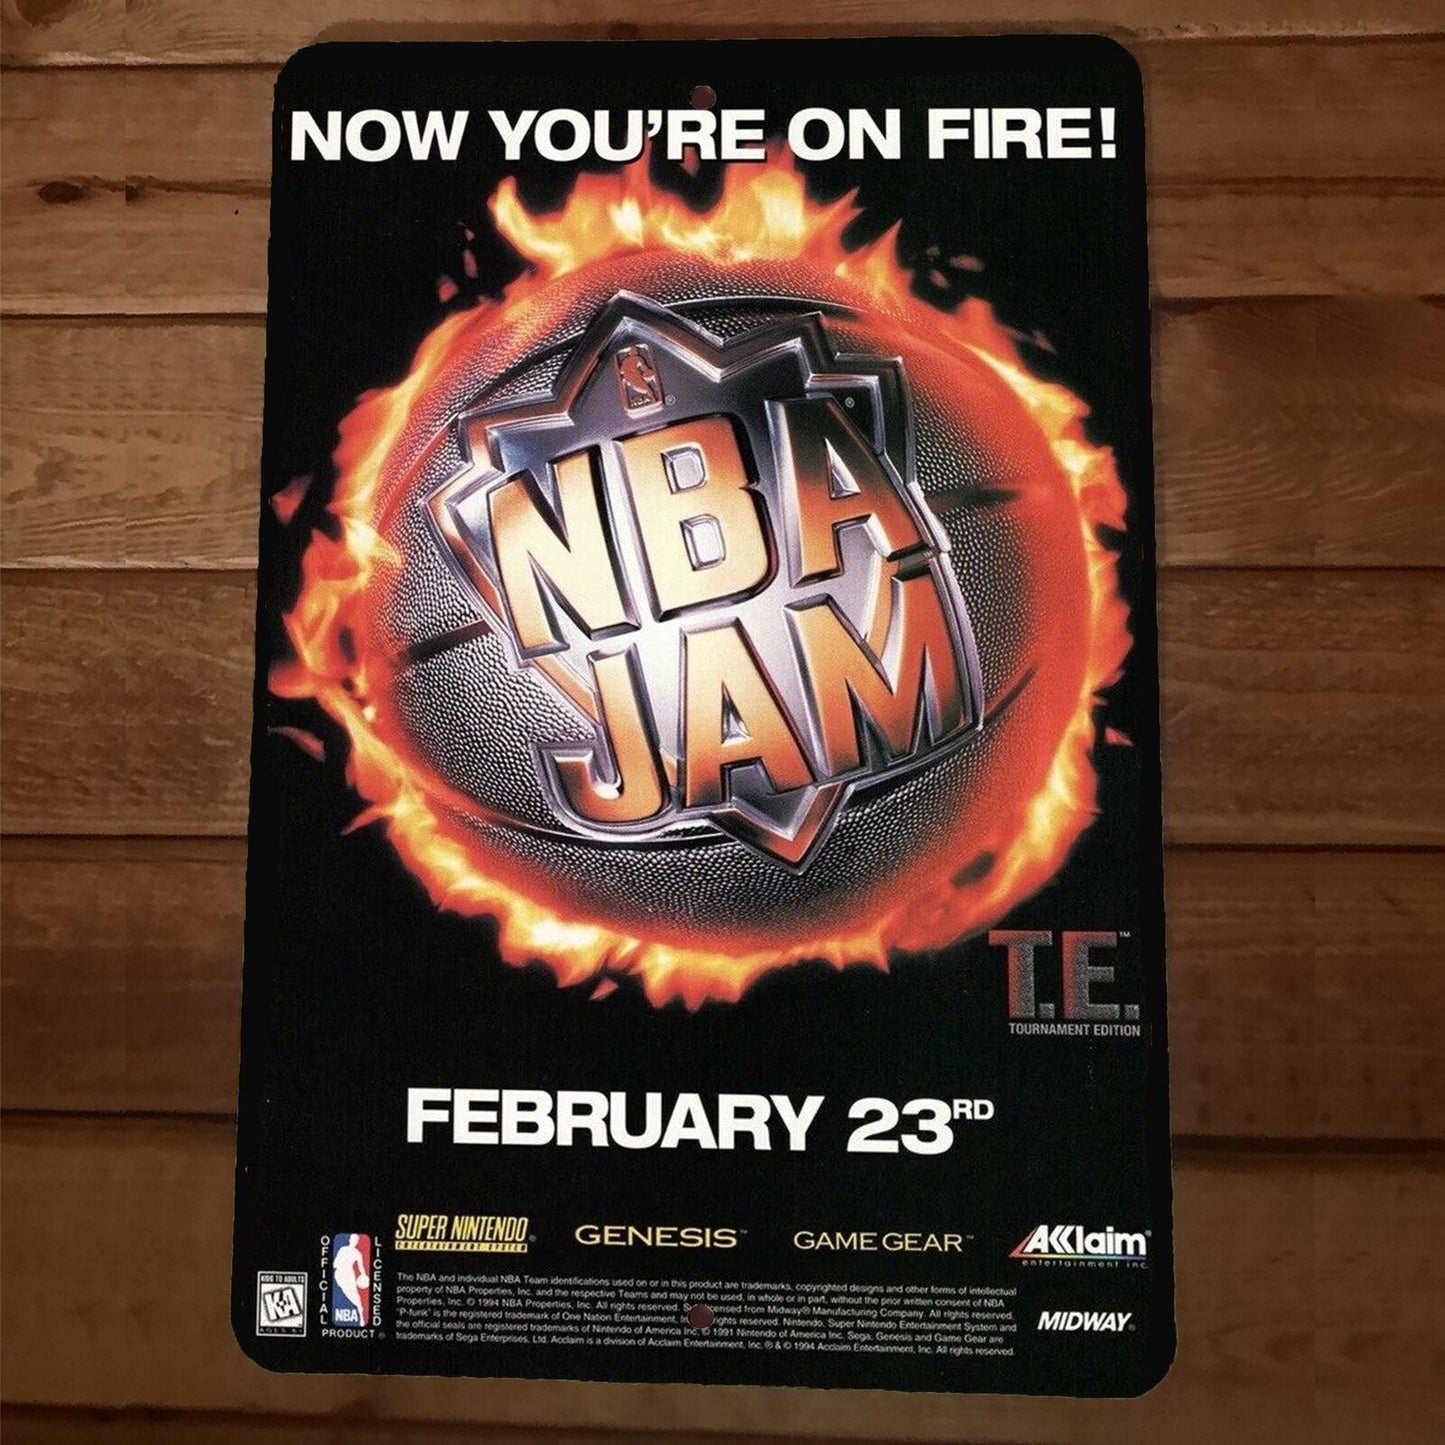 NBA Jam TE Now Youre on Fire 8x12 Metal Wall Sign Arcade Video Game Poster